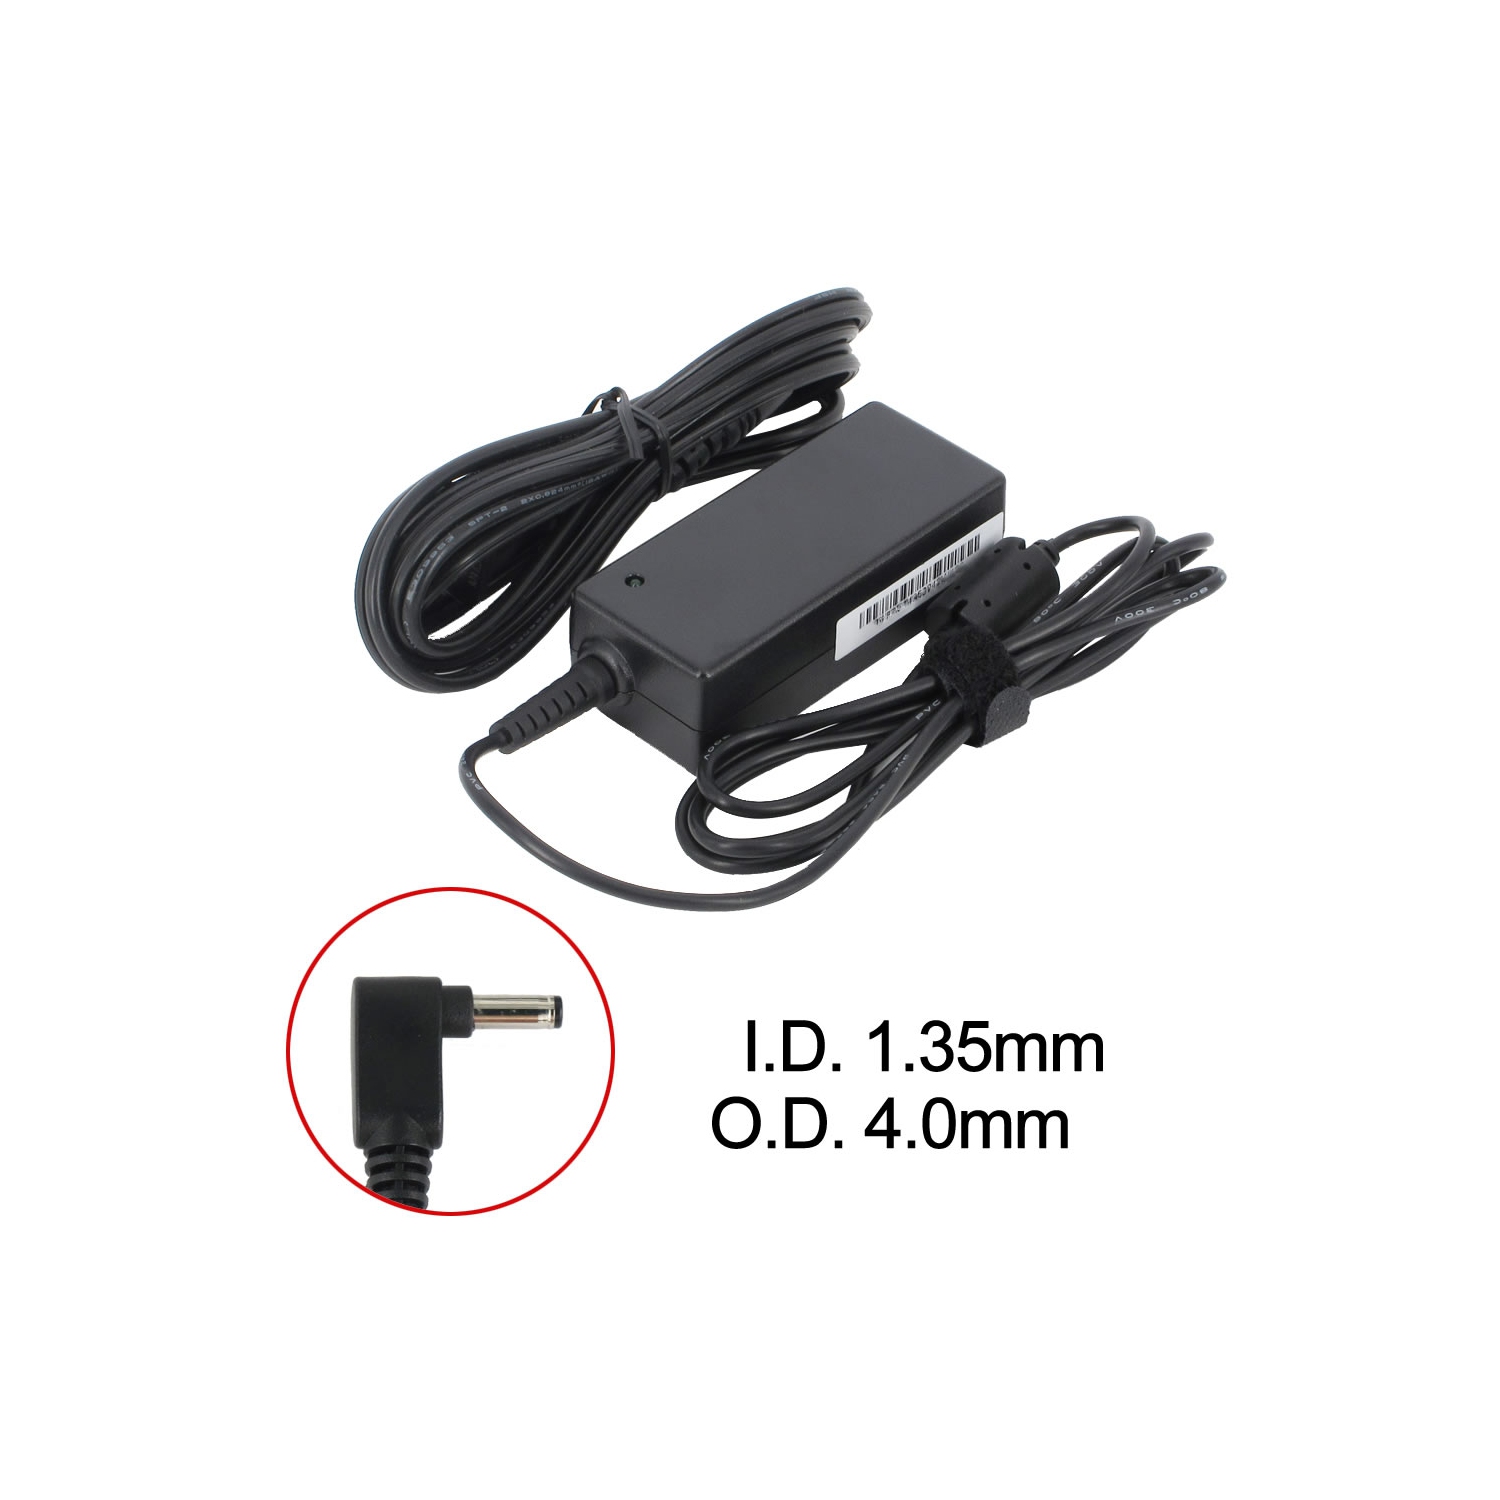 BattDepot: New Laptop AC Adapter for Asus VivoBook E402SA-DS01, 0A001-00230300, 0A001-00233100, EXA1206CH, W15-065N1A